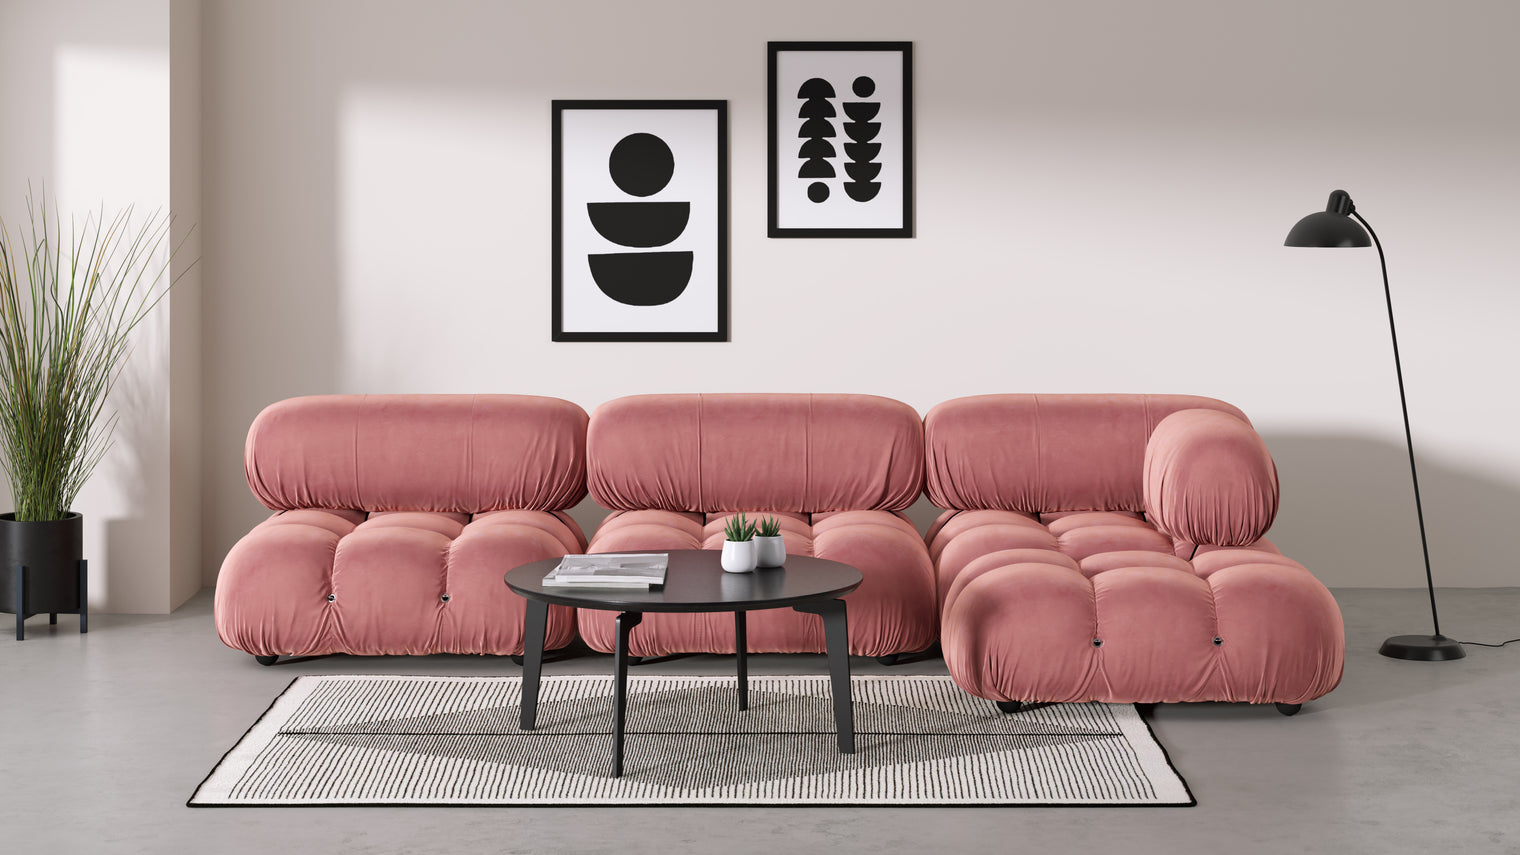 Belia Sectional - Belia Sectional, Right Chaise, Blush Pink Velvet